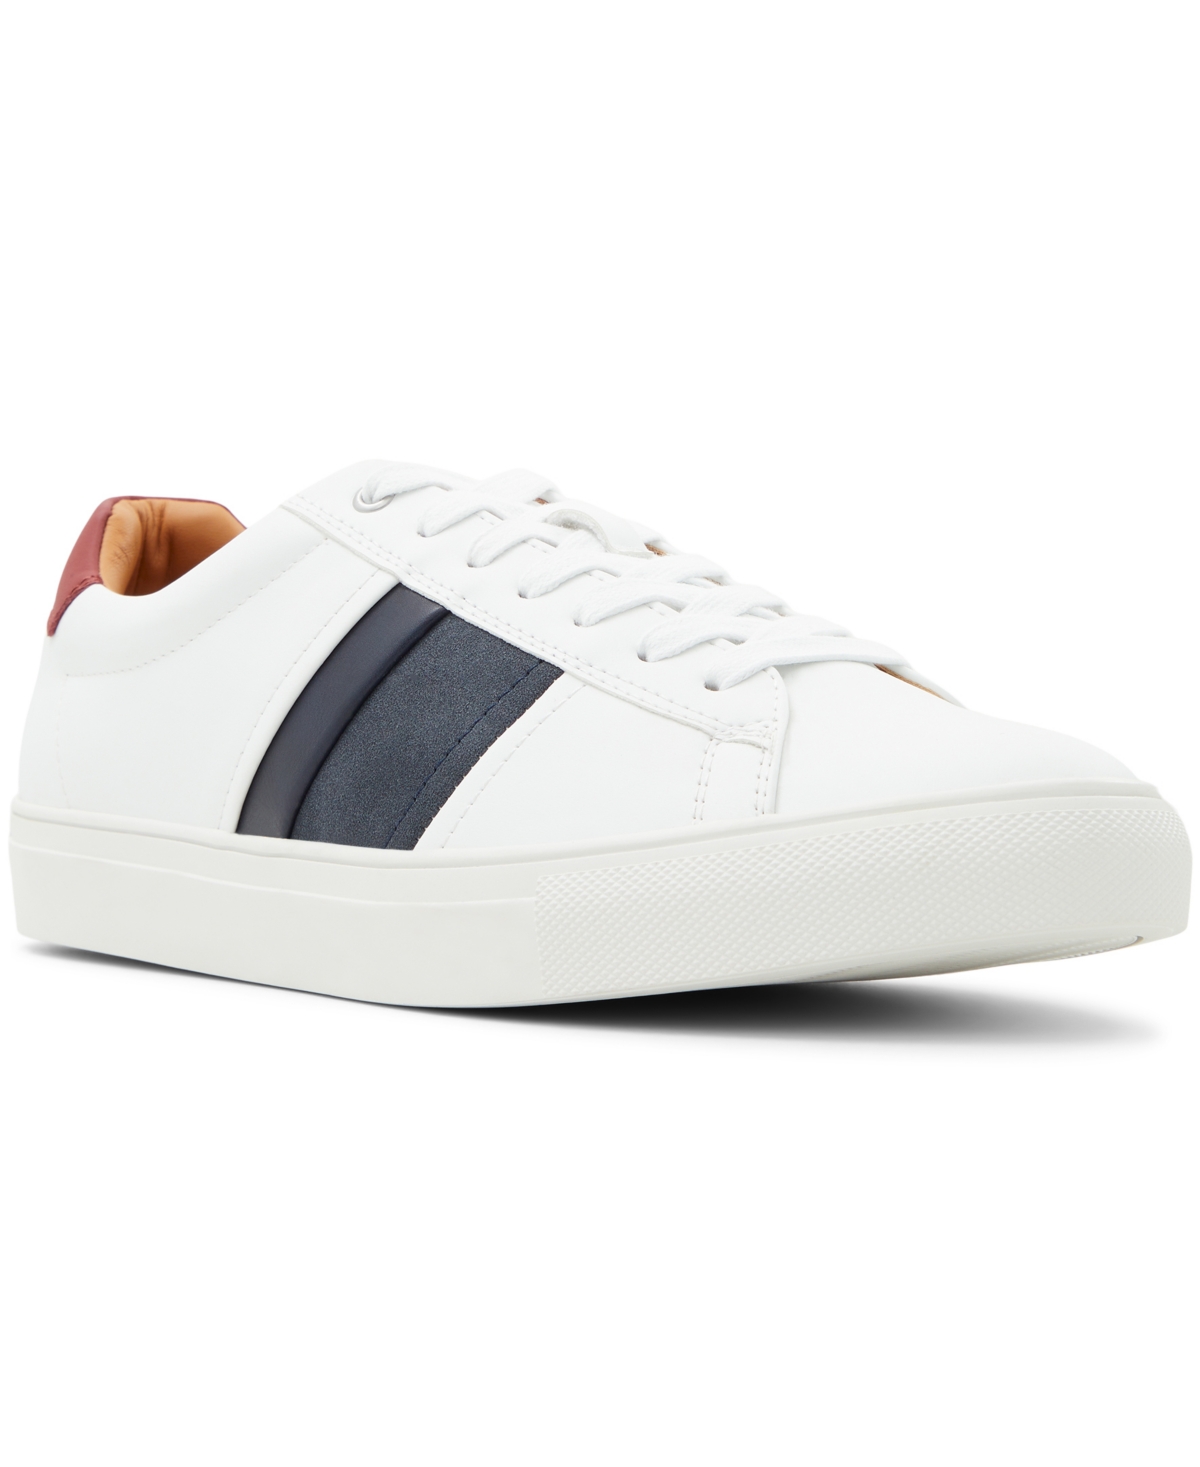 Call It Spring Men's Munroe Fashion Athletics Shoes In White Multi